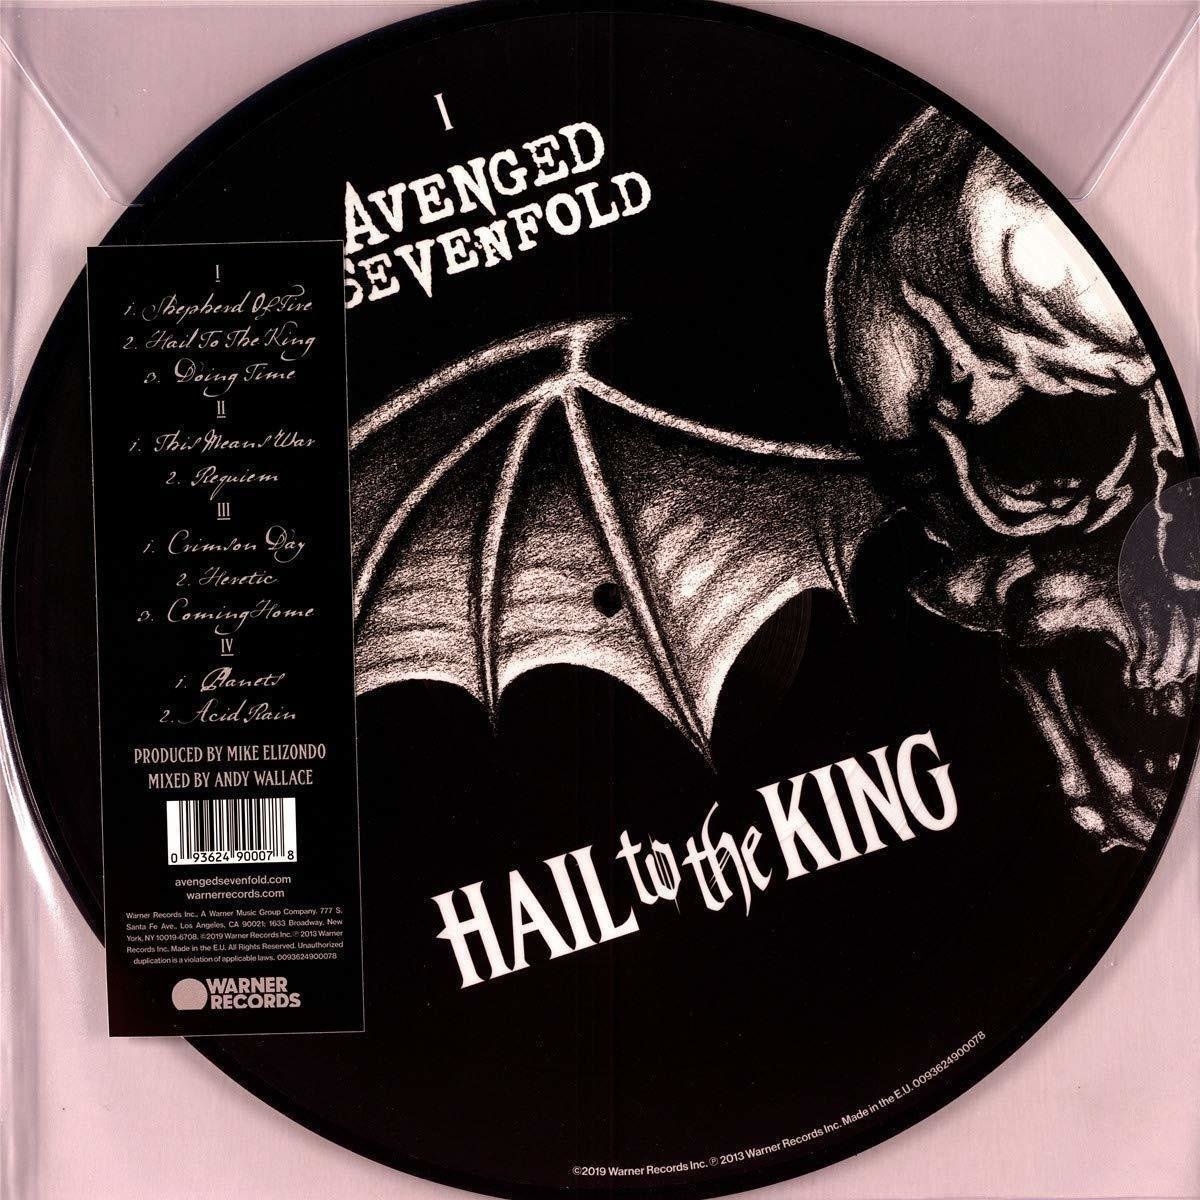 Vinyl Record Avenged Sevenfold - Hail To The King (Picture Vinyl) (LP)